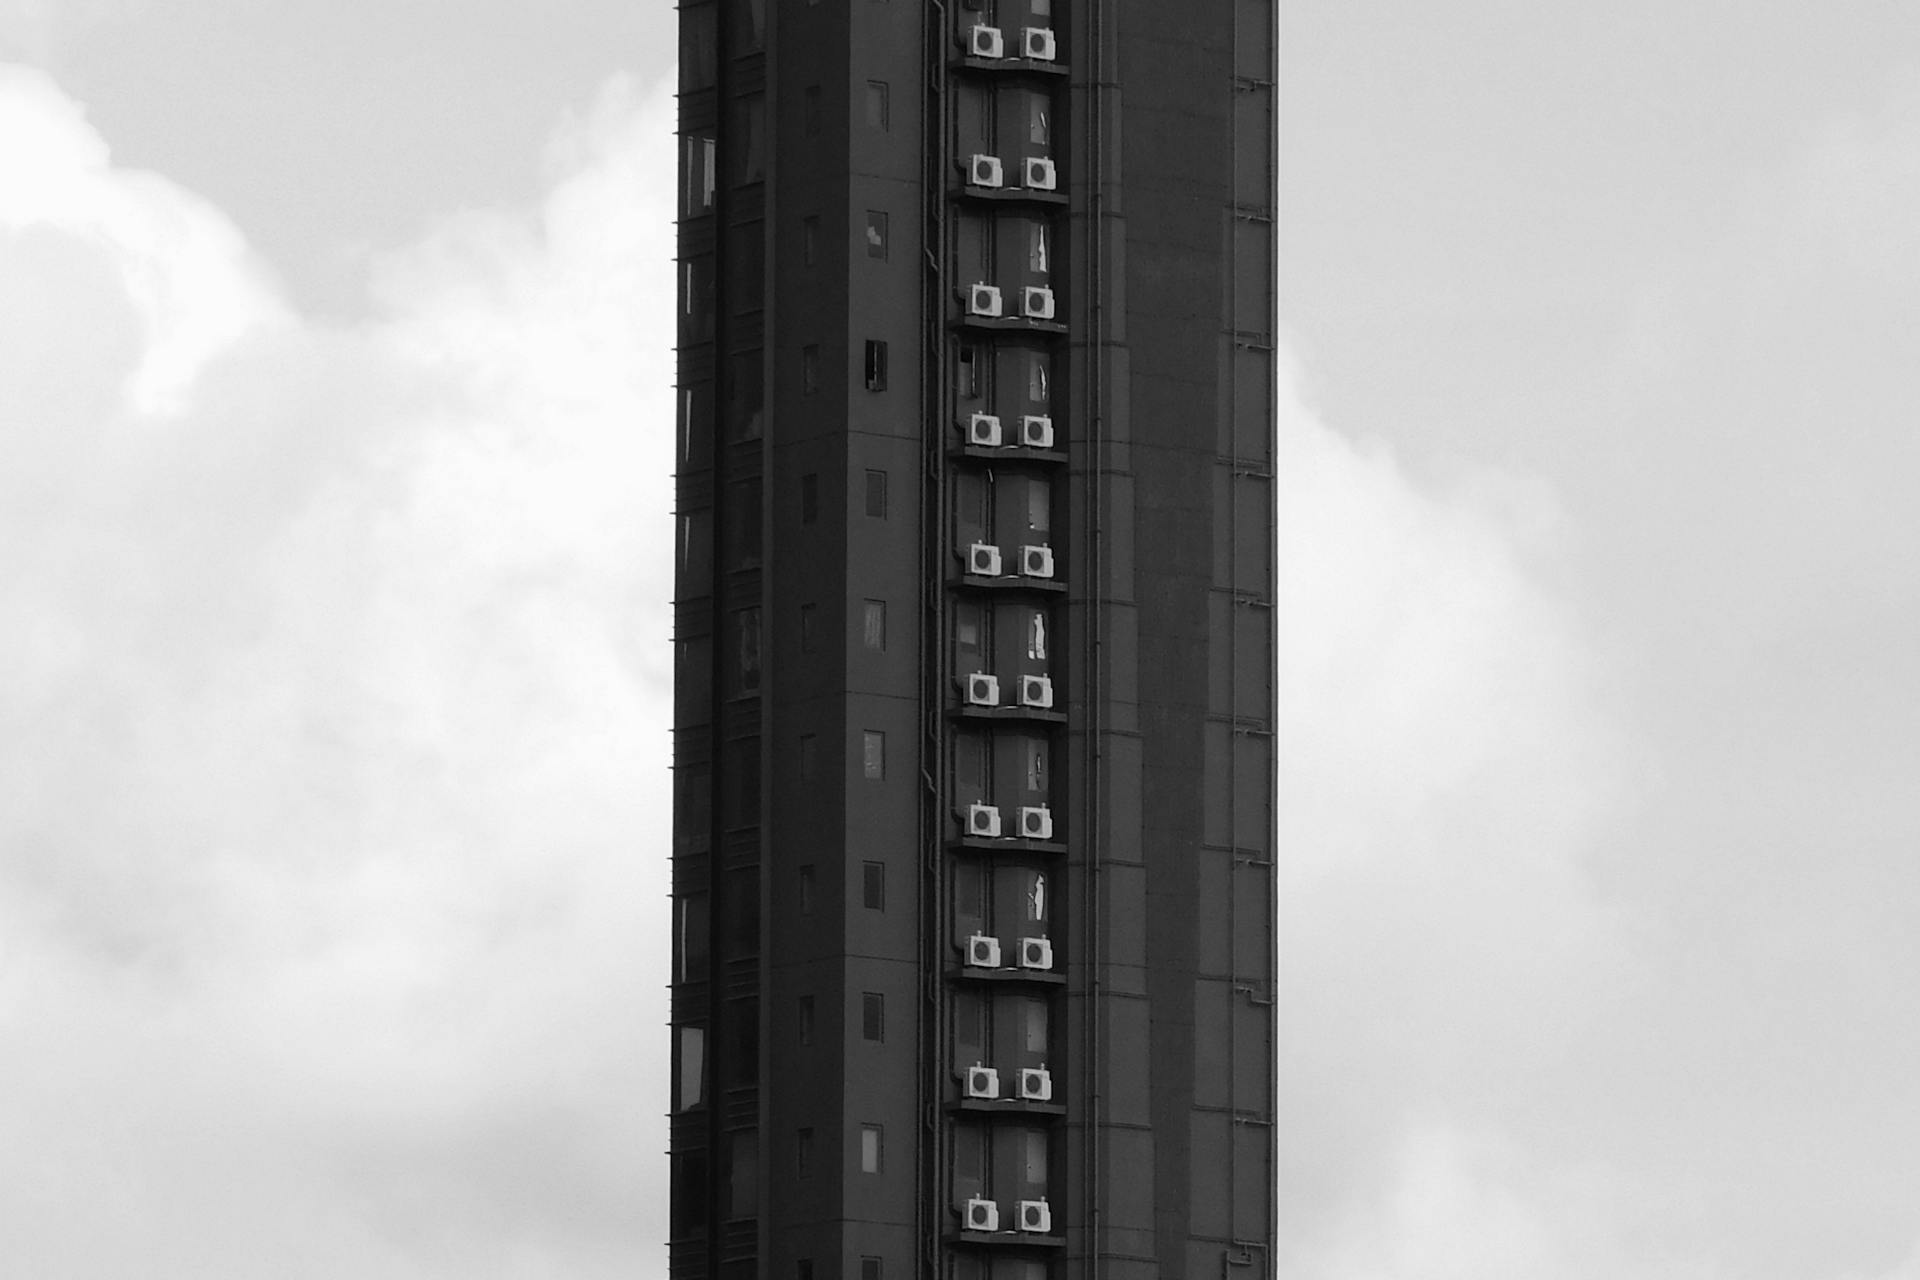 Rows of Air Conditioners on a Tall Skyscraper